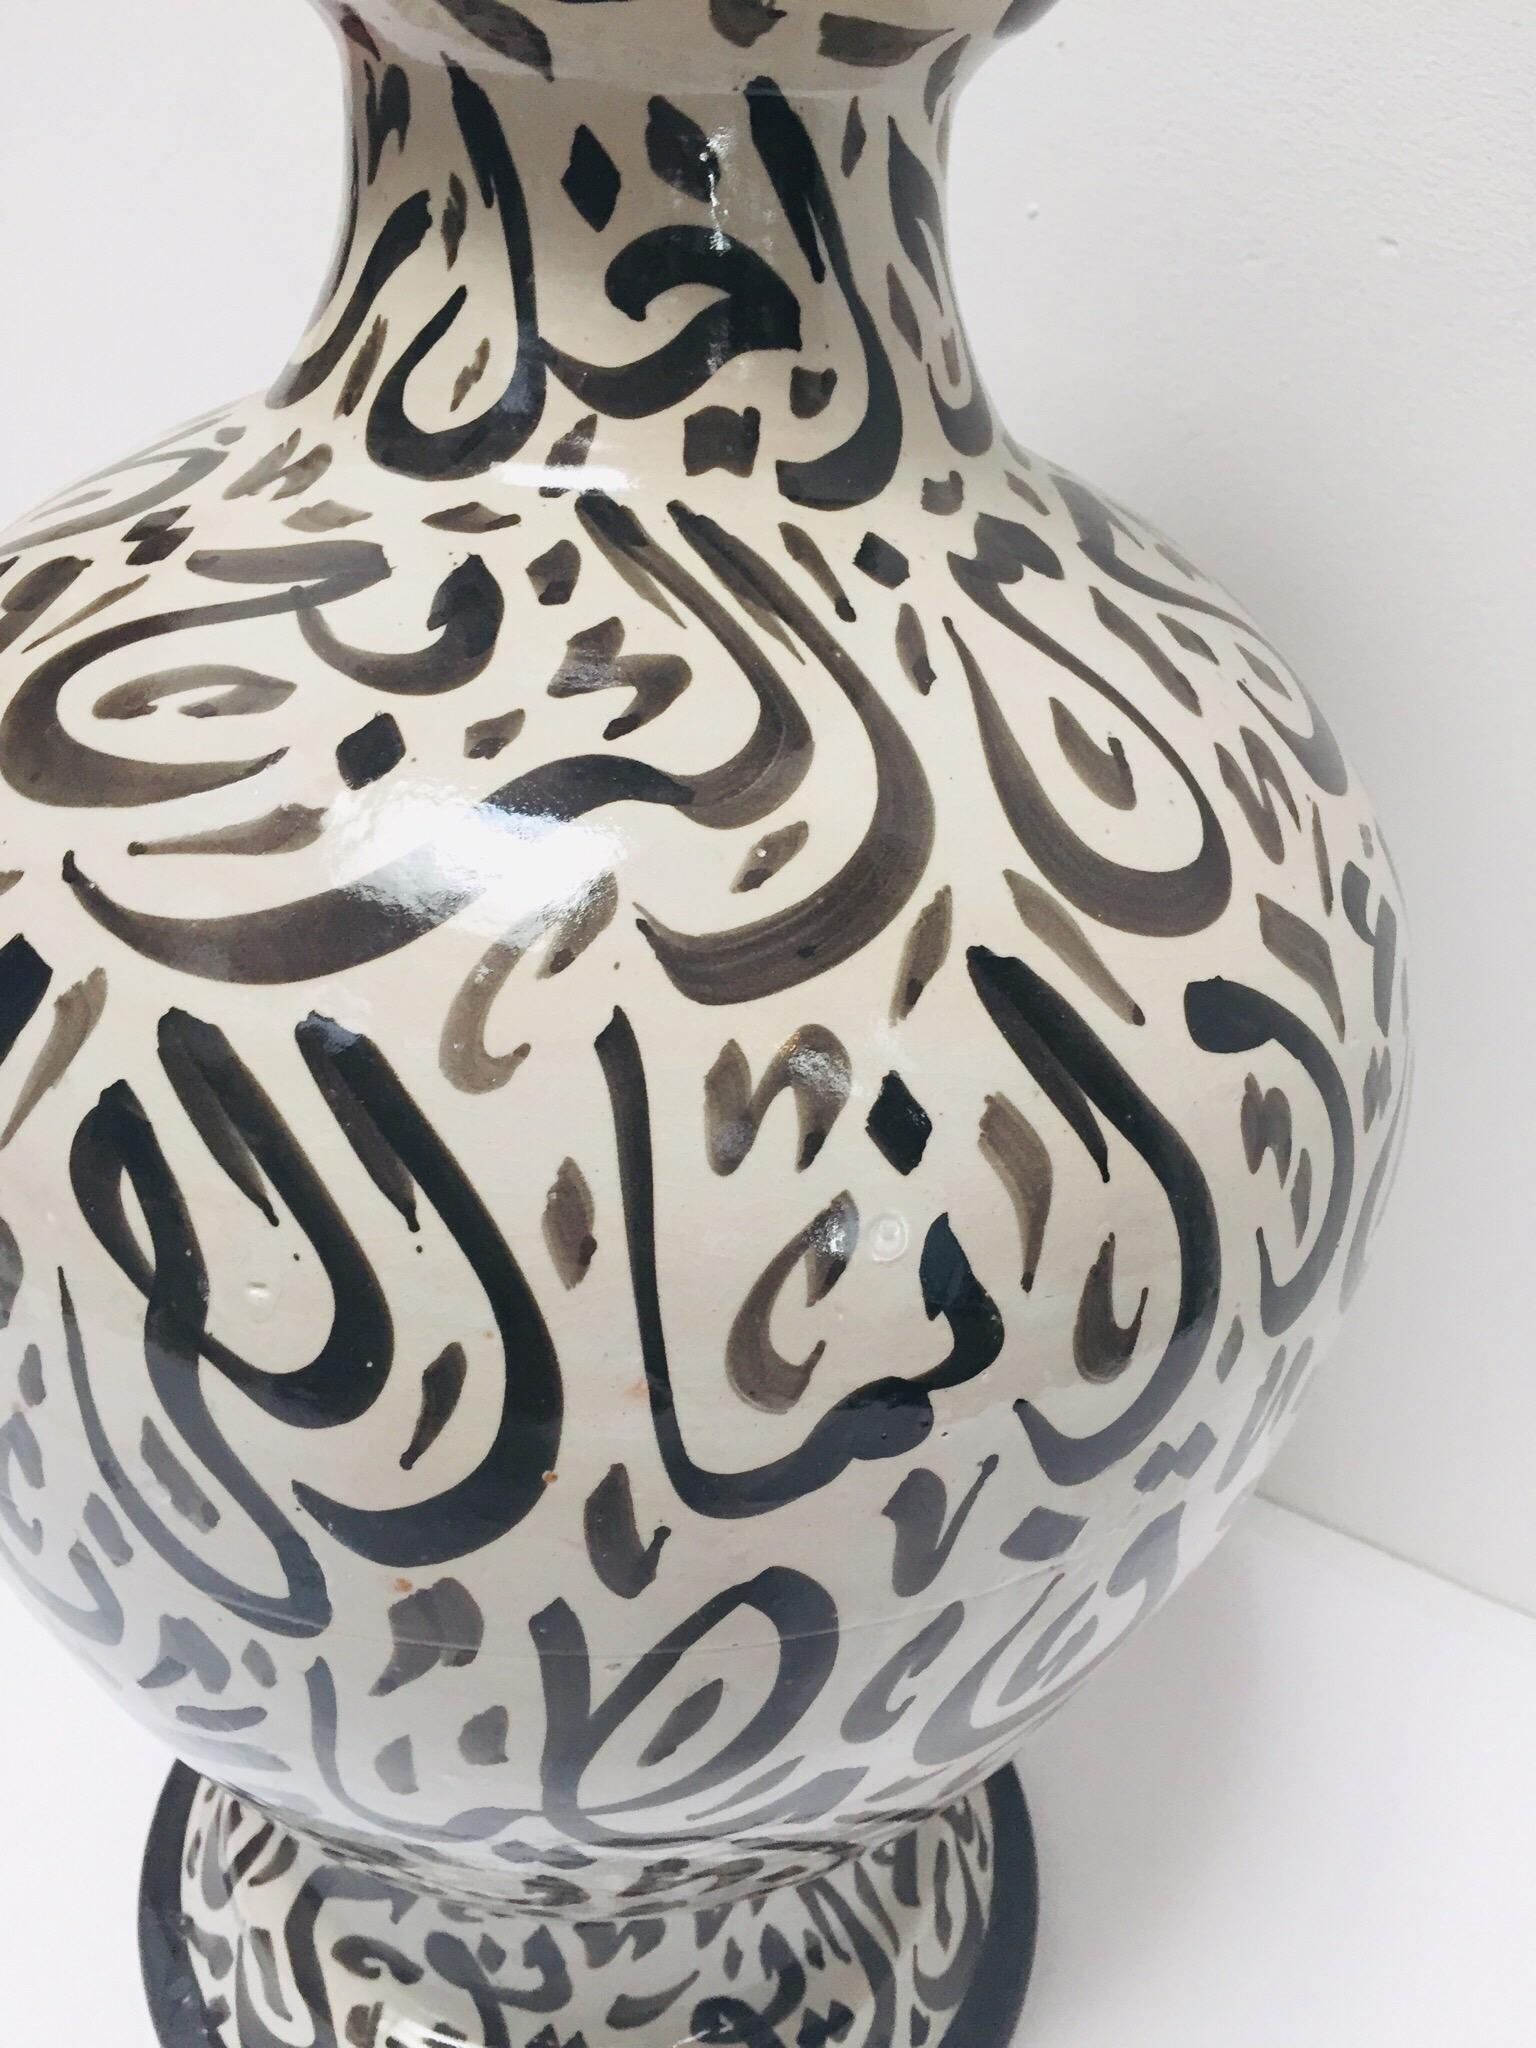 Large Moroccan Glazed Ceramic Vase with Arabic Calligraphy Brown Writing, Fez 1